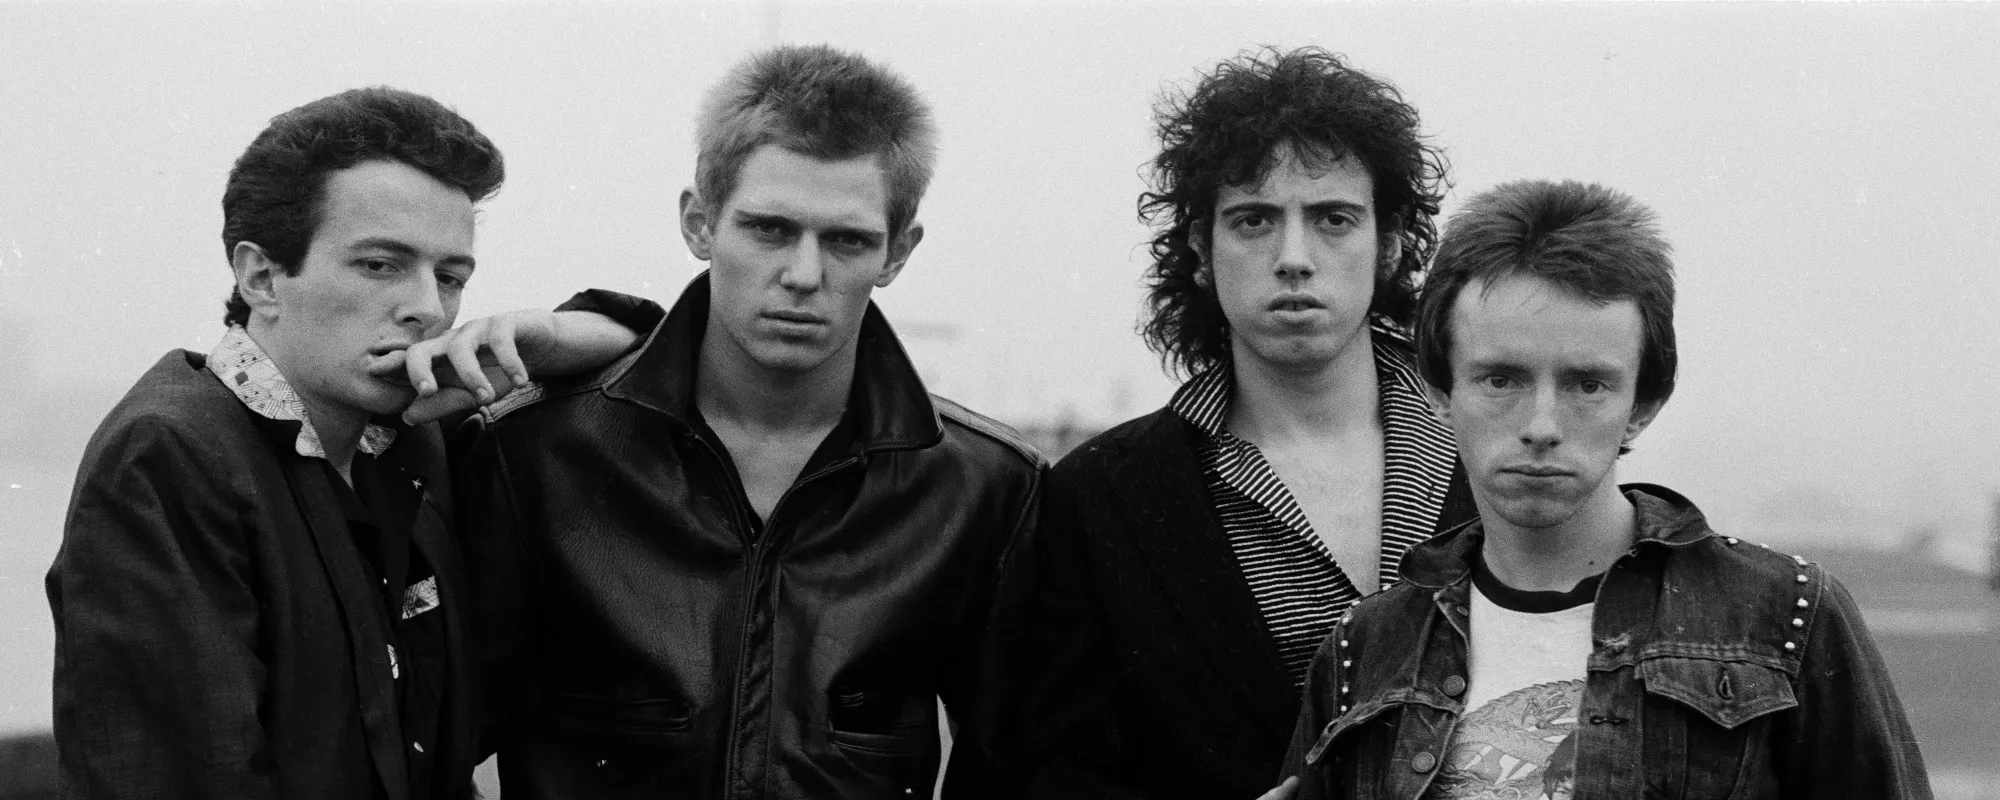 The Story Behind the Famous ‘London Calling’ Album Cover by The Clash